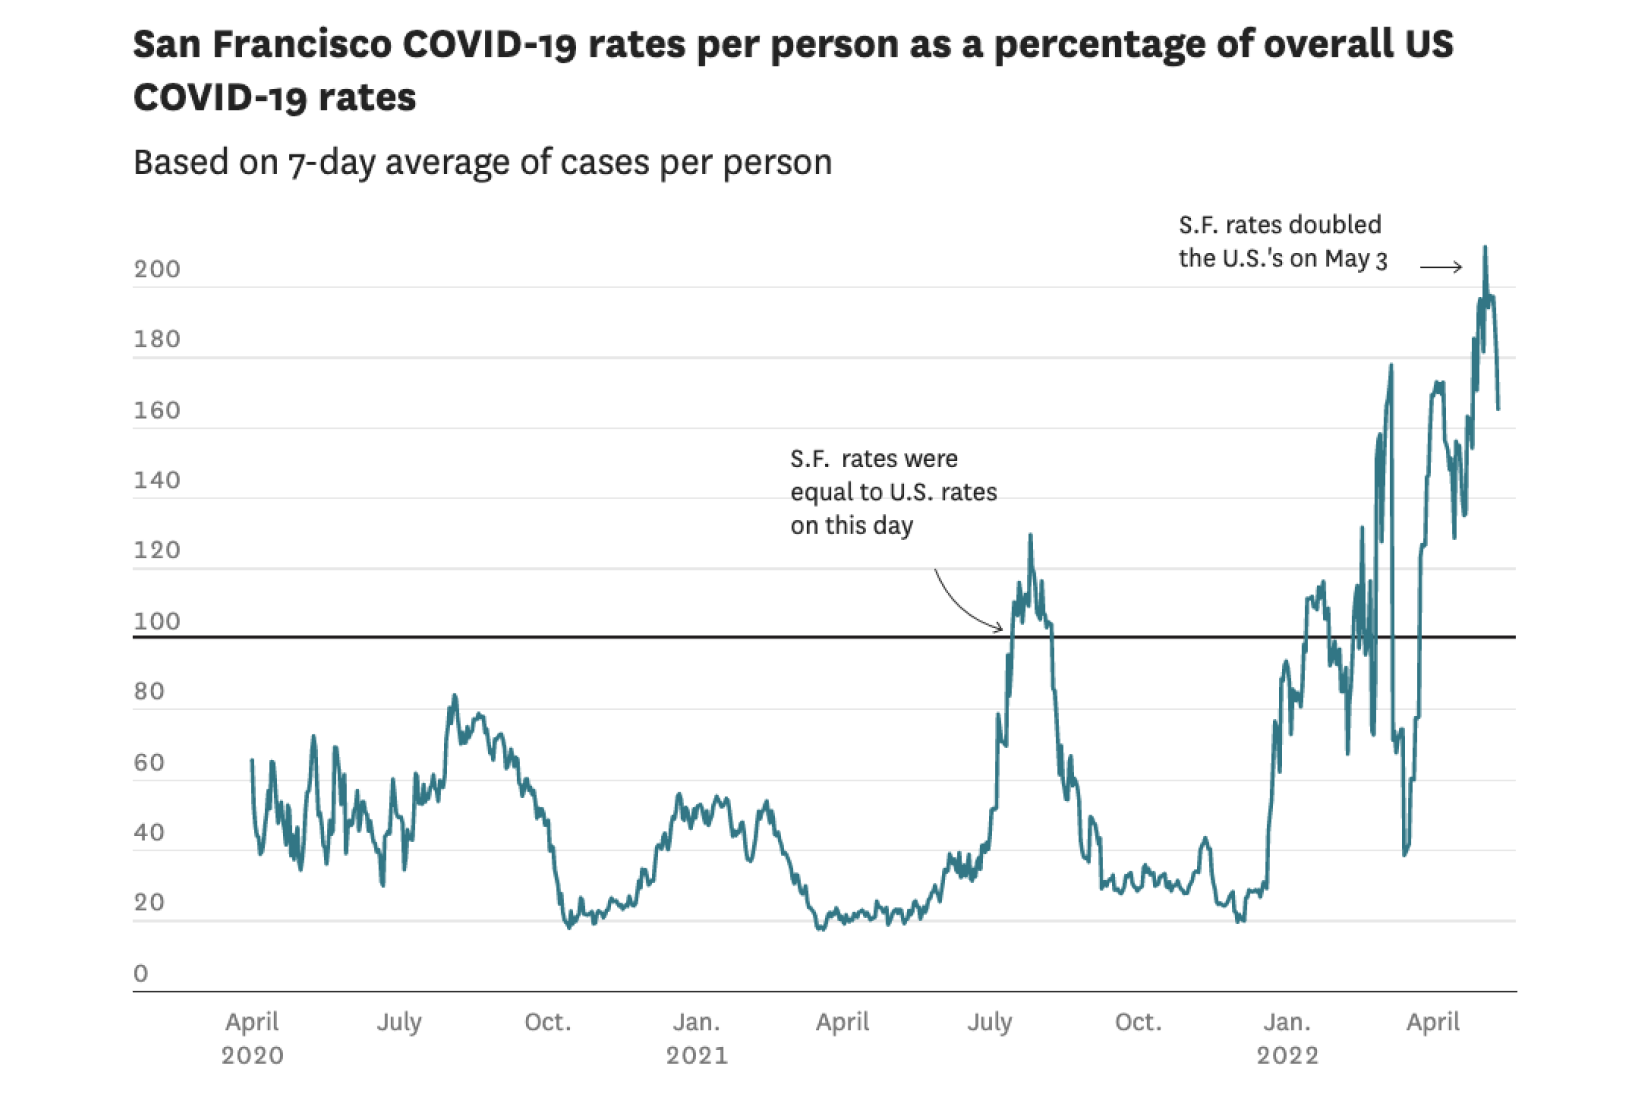 For almost the entire pandemic, San Francisco’s COVID-19 case rates have been lower than the nation’s as a whole. But not anymore. Earlier this sp